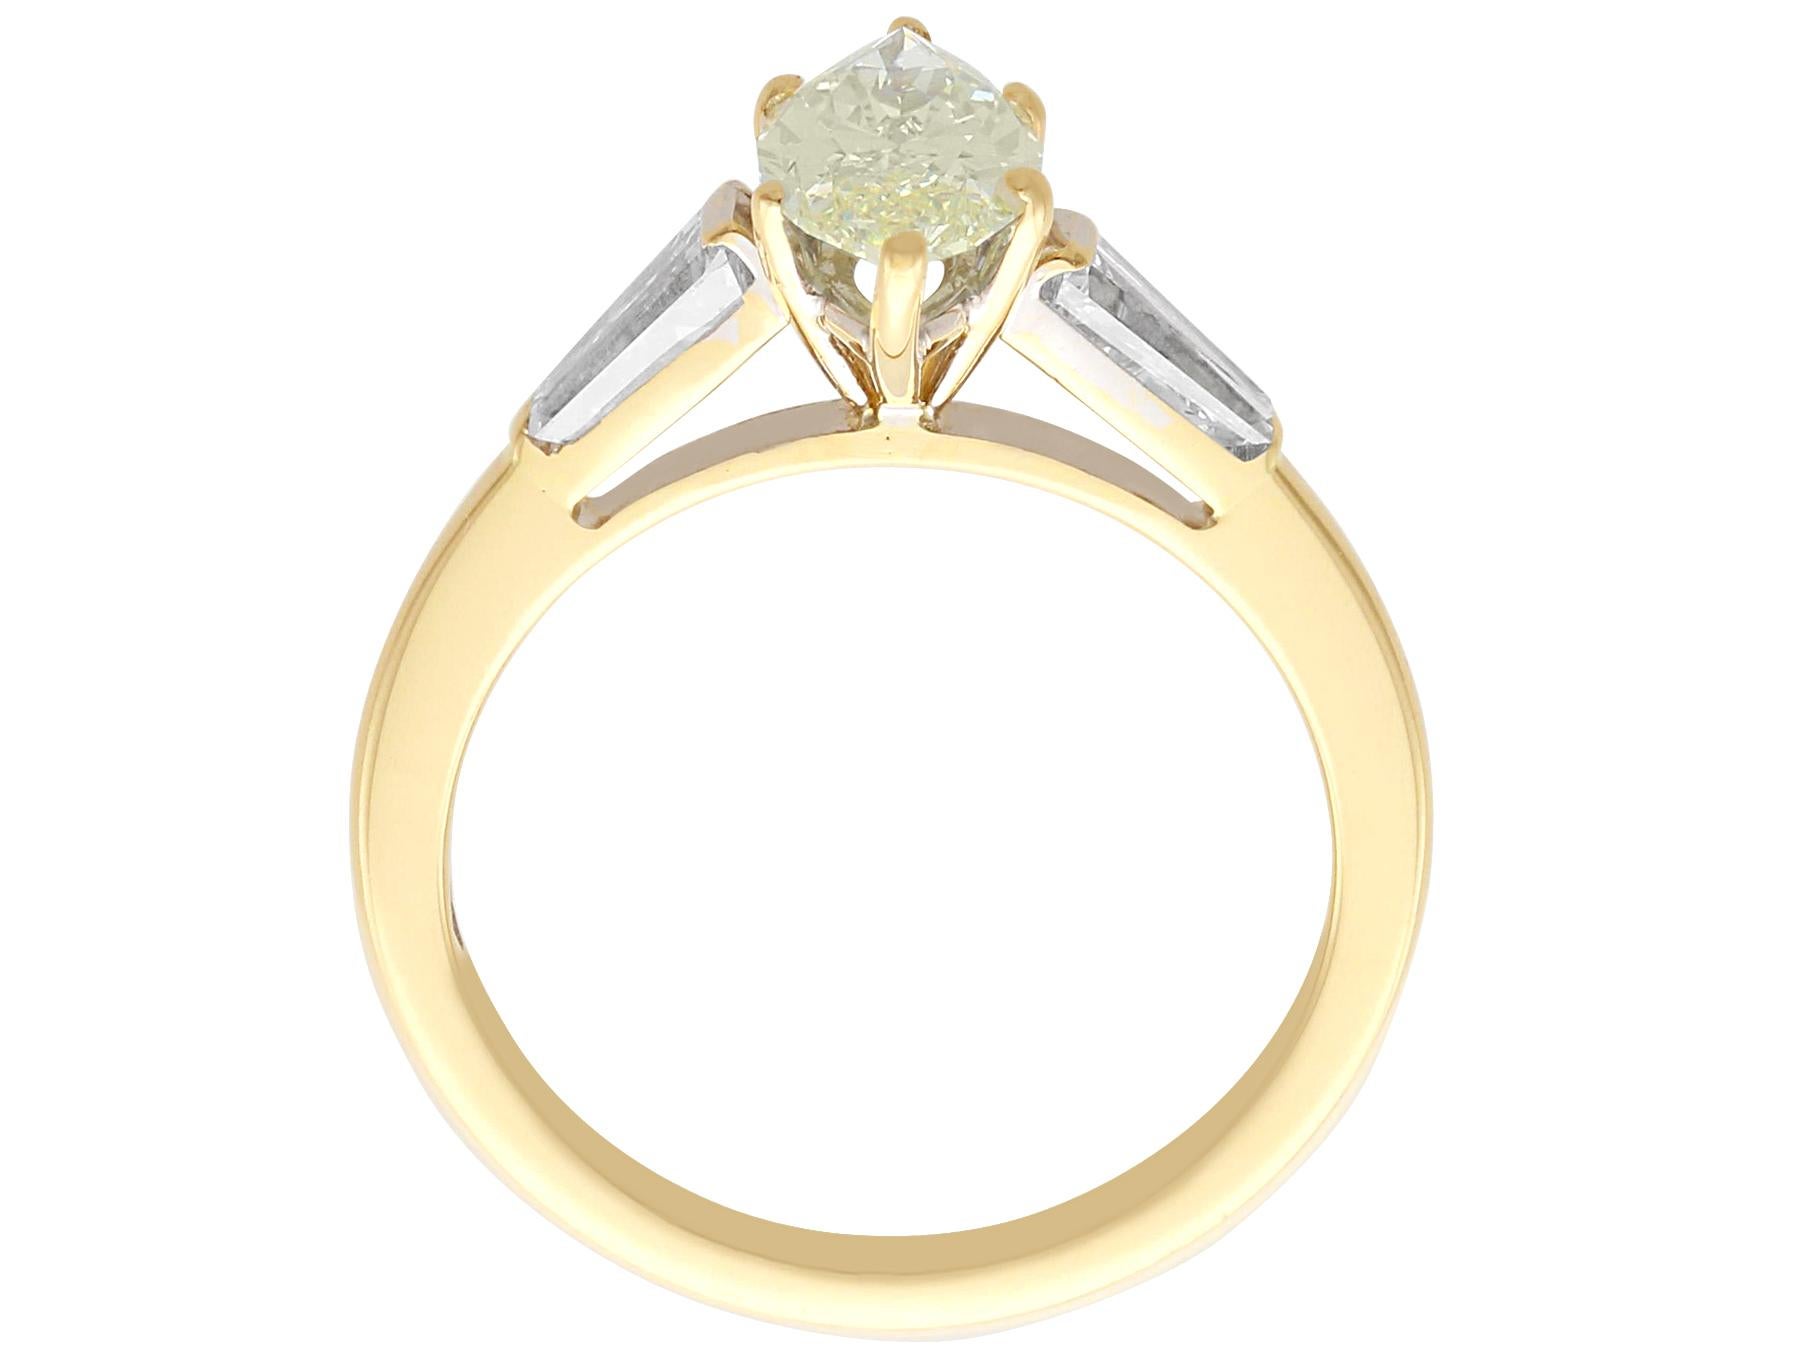 GIA Certified 1.36 Carat Light Yellow Diamond and Yellow Gold Solitaire Ring In Excellent Condition For Sale In Jesmond, Newcastle Upon Tyne